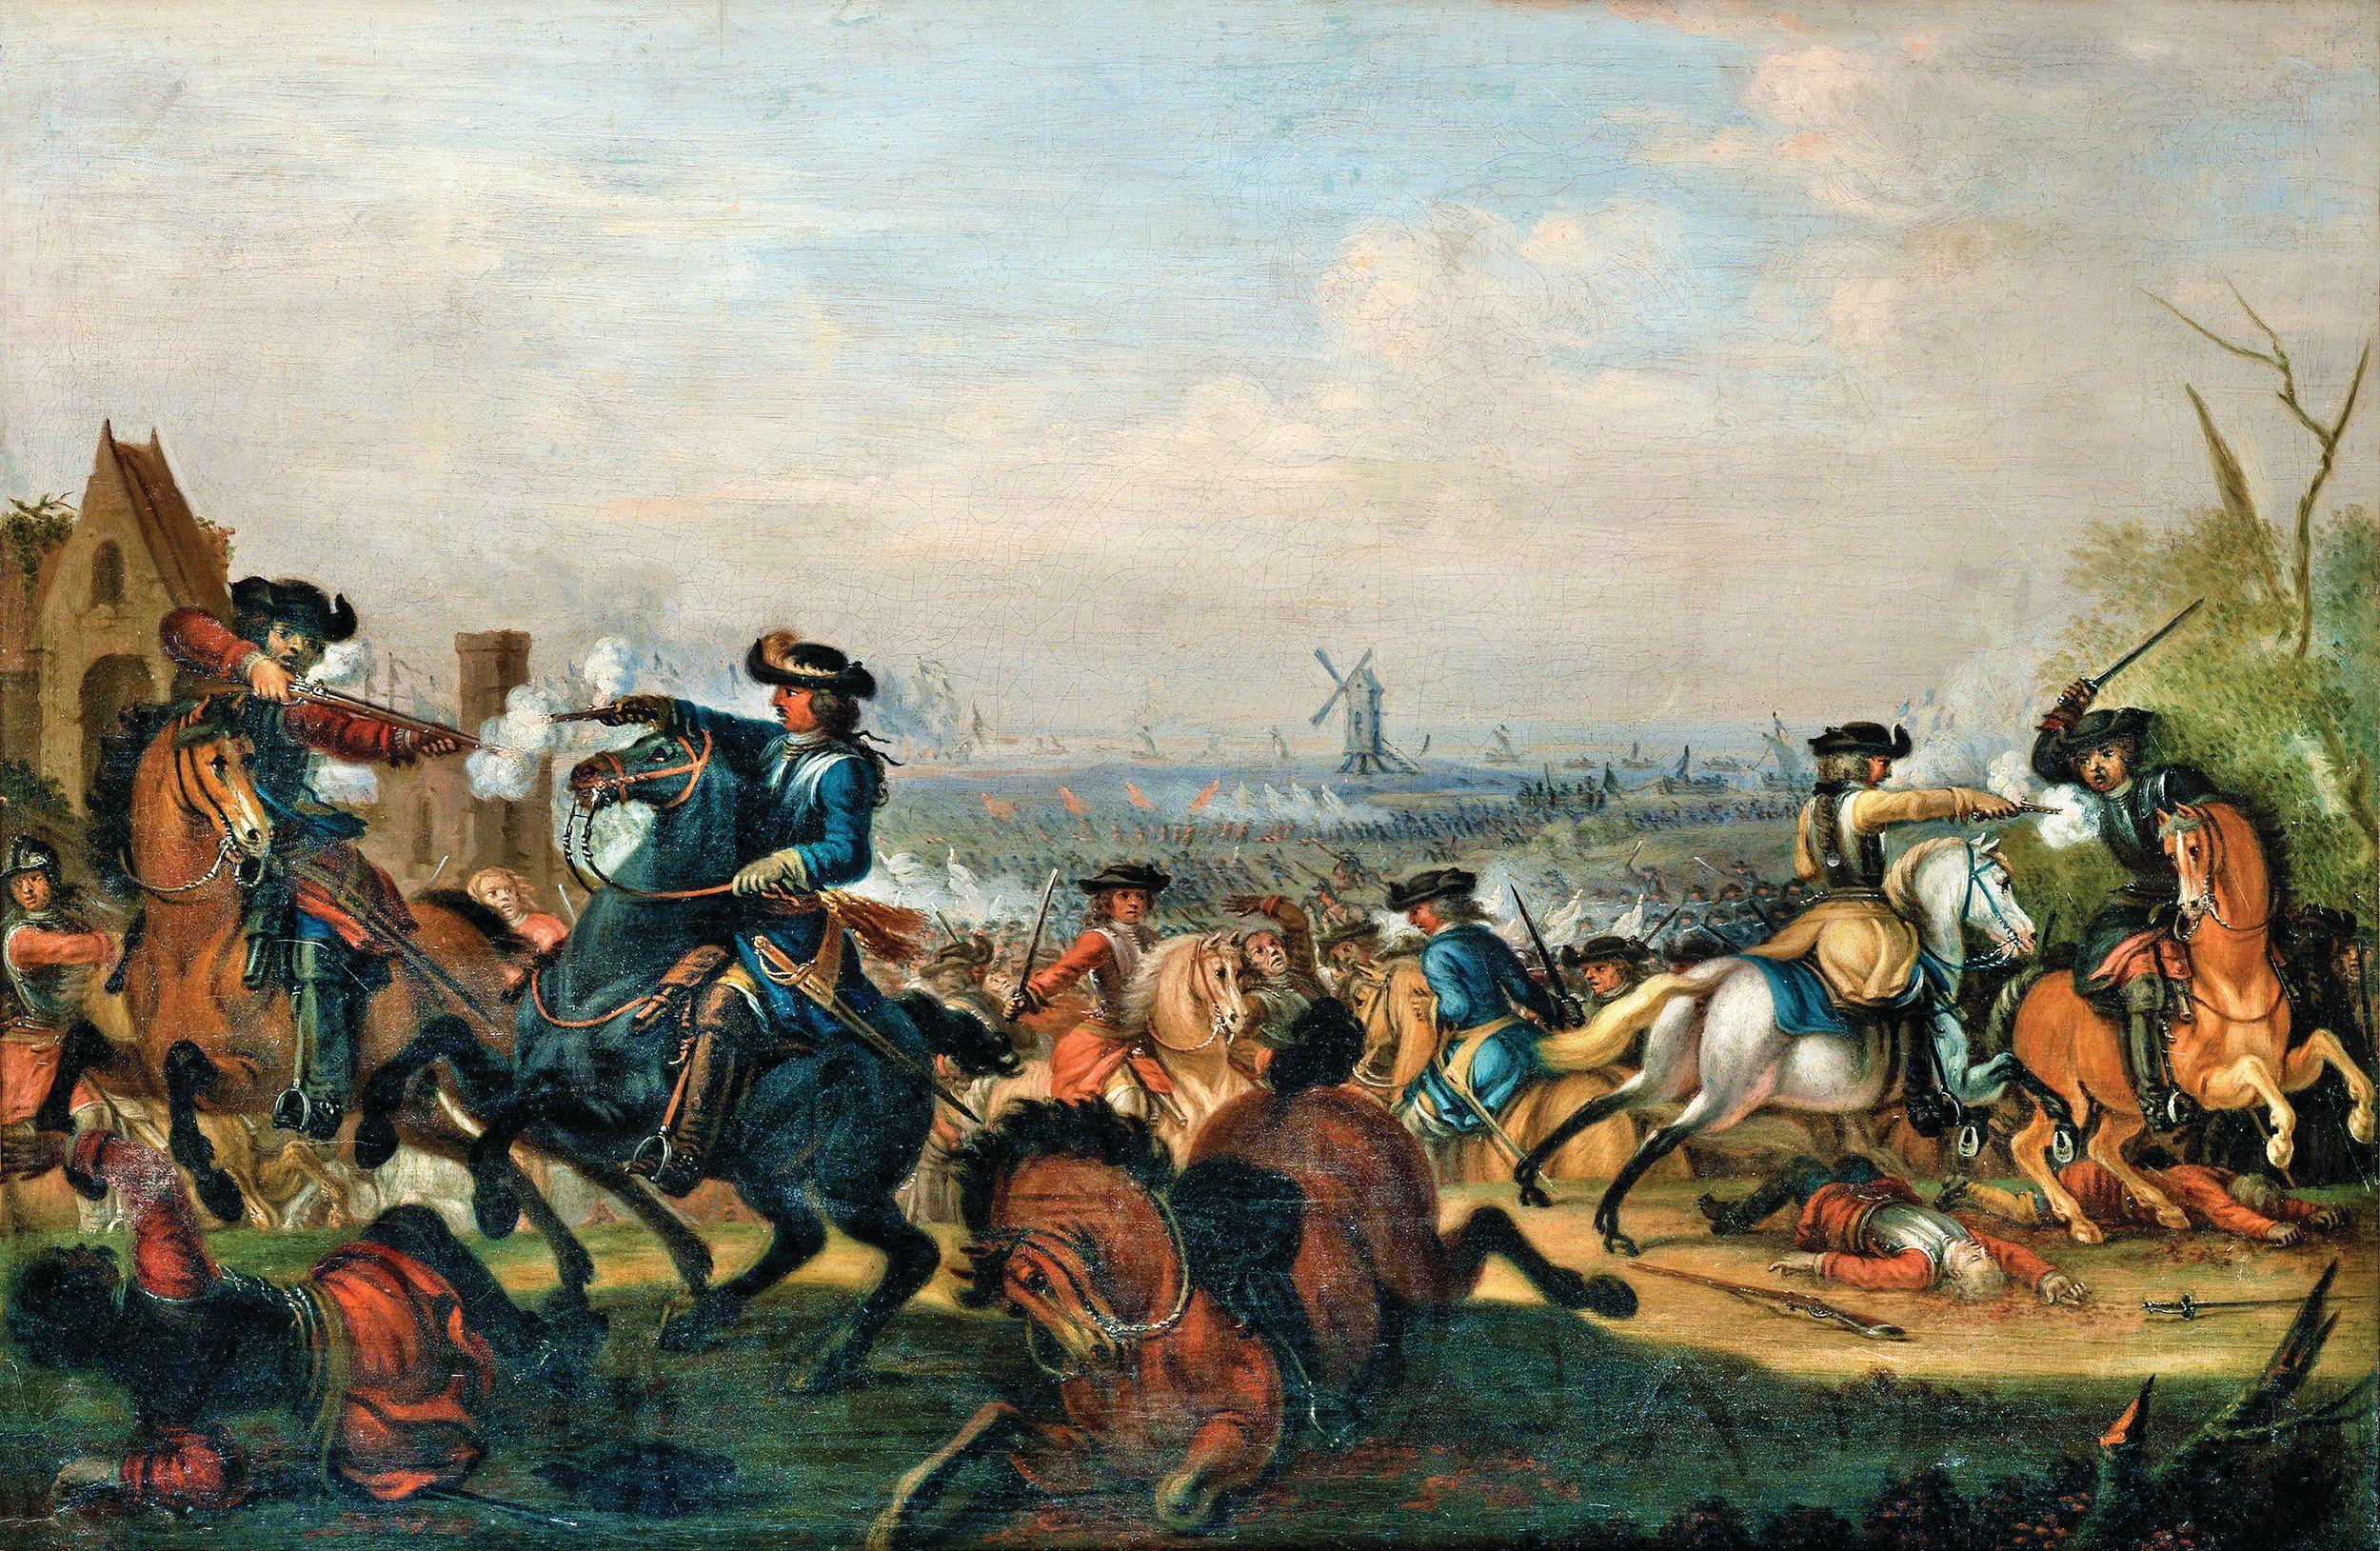 Opposing cavalry fought at close quarters with pistols and sabers in the War of the Spanish Succession. France, which possessed the largest organized cavalry force in Europe, employed its horsemen, not its foot soldiers, as its striking force. 